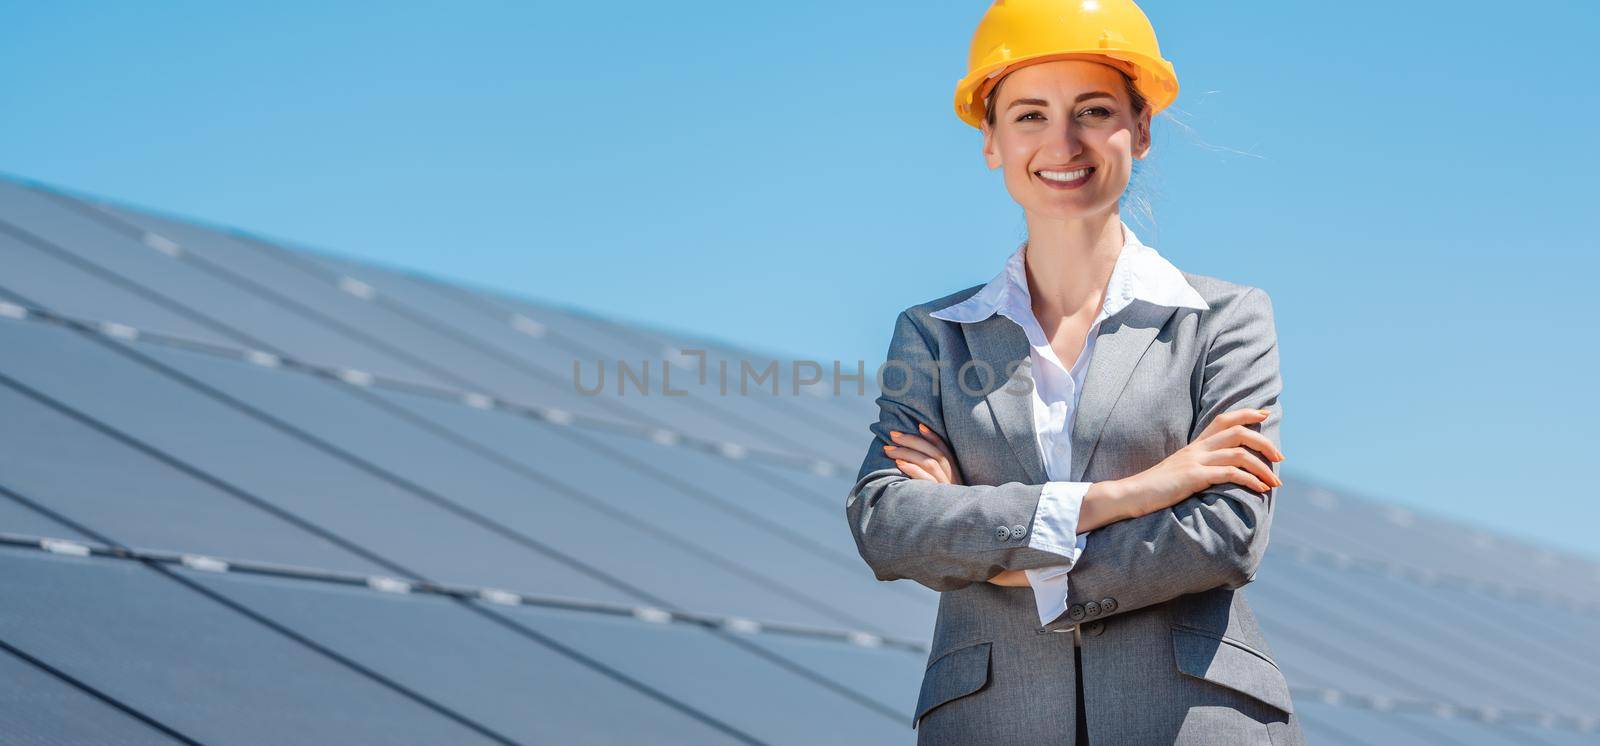 Woman investor in clean energy standing proudly in front of solar panels